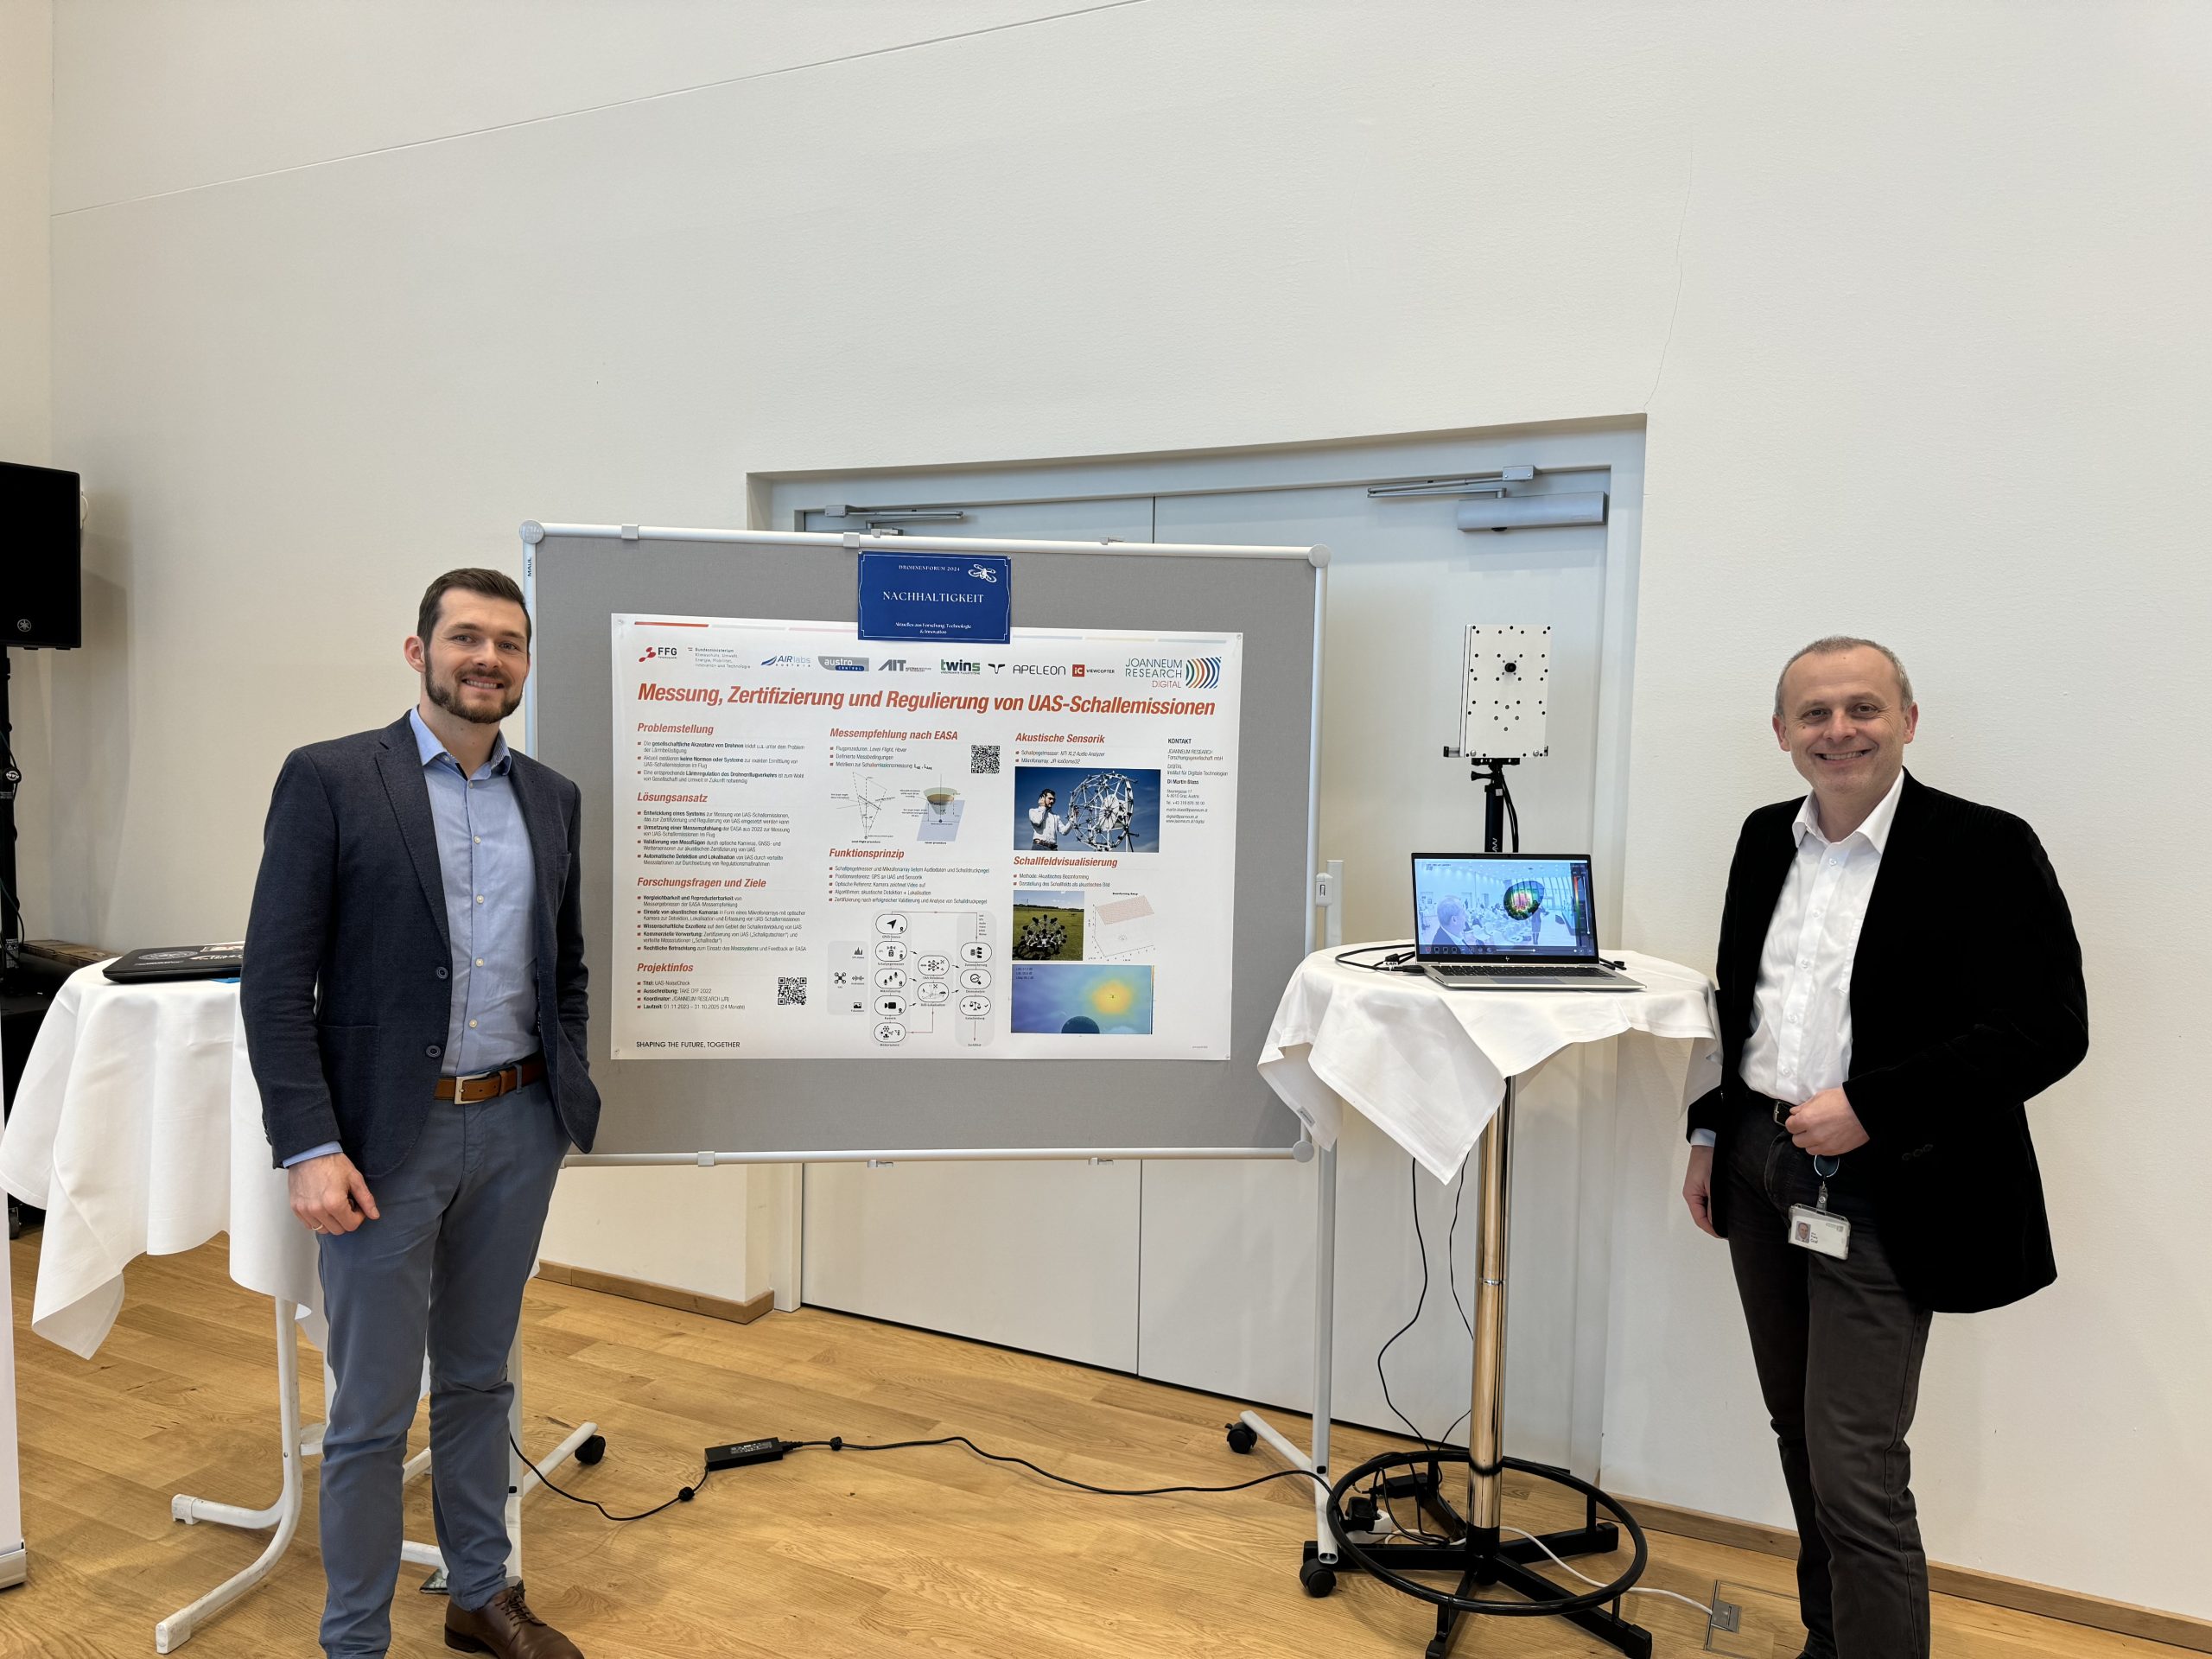 Martin Blass (left) and Franz Graf (right) at the information stand on the topic of noise emissions from drones, photo: JOANNEUM RESEARCH